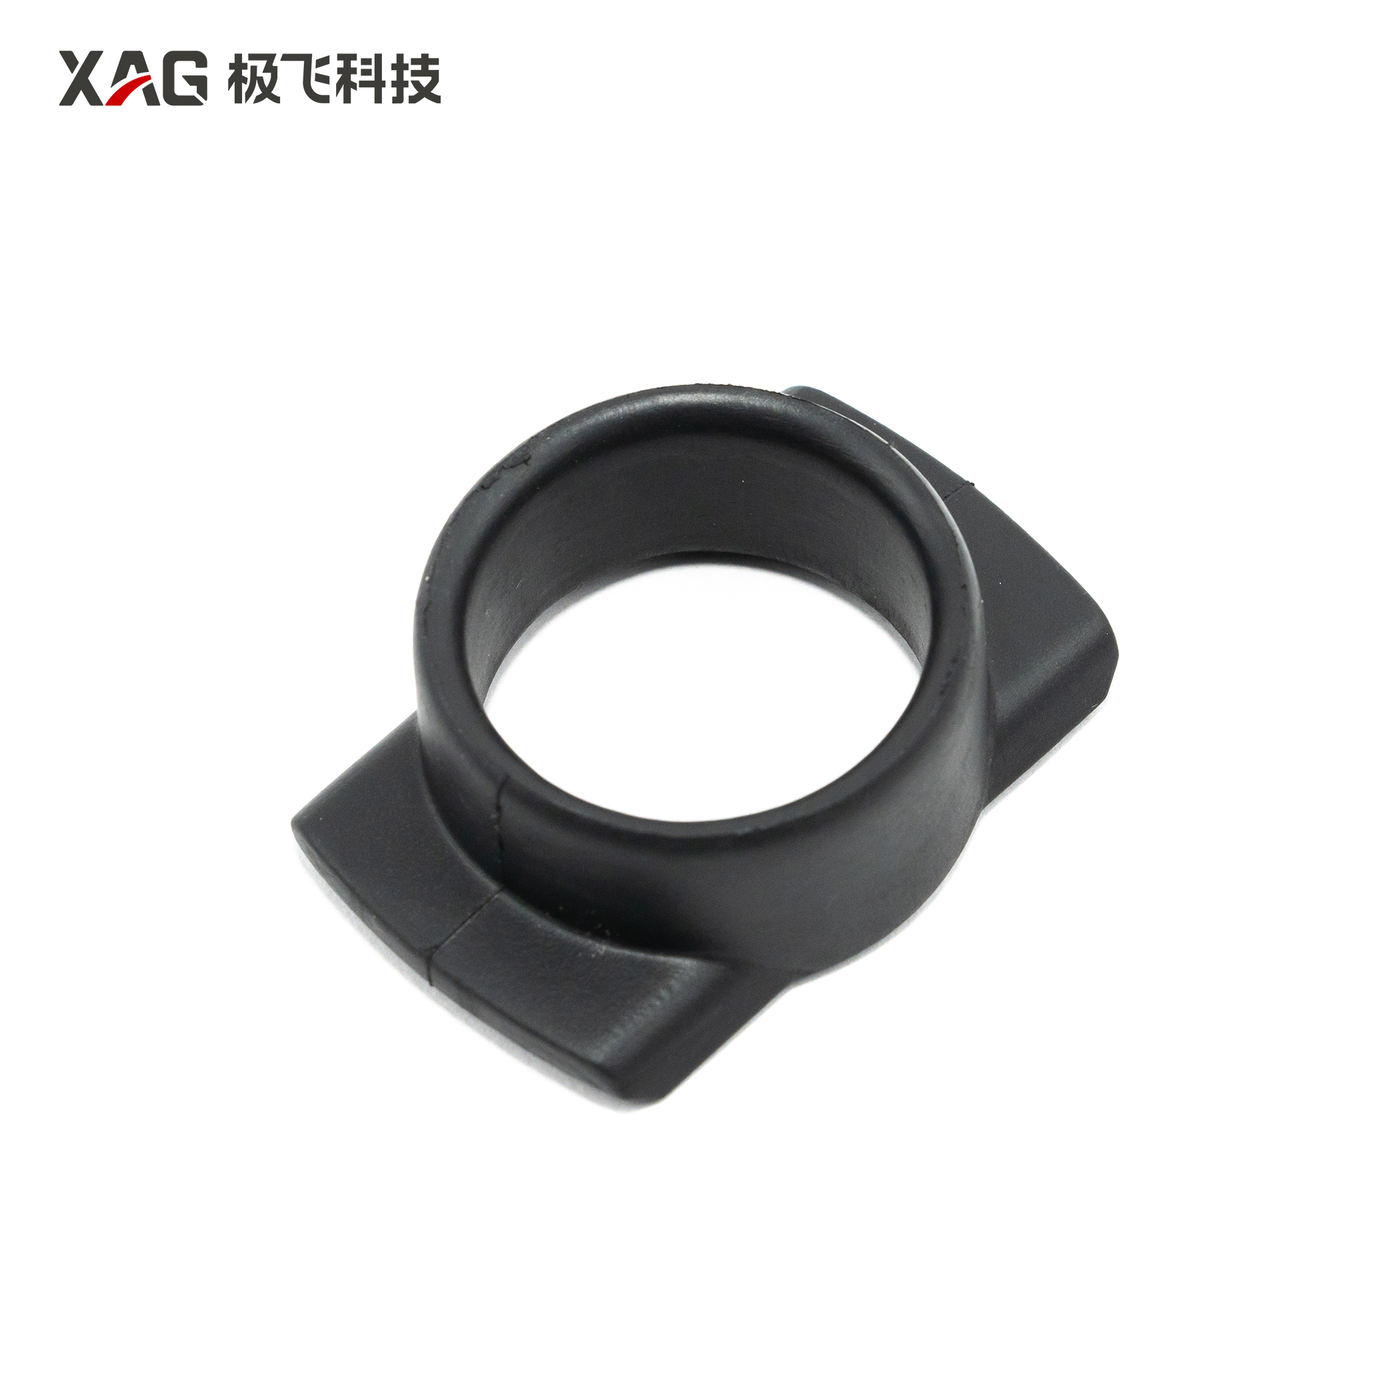 22P009 Anti-friction rubber for fuselage end of machine arm (A2)